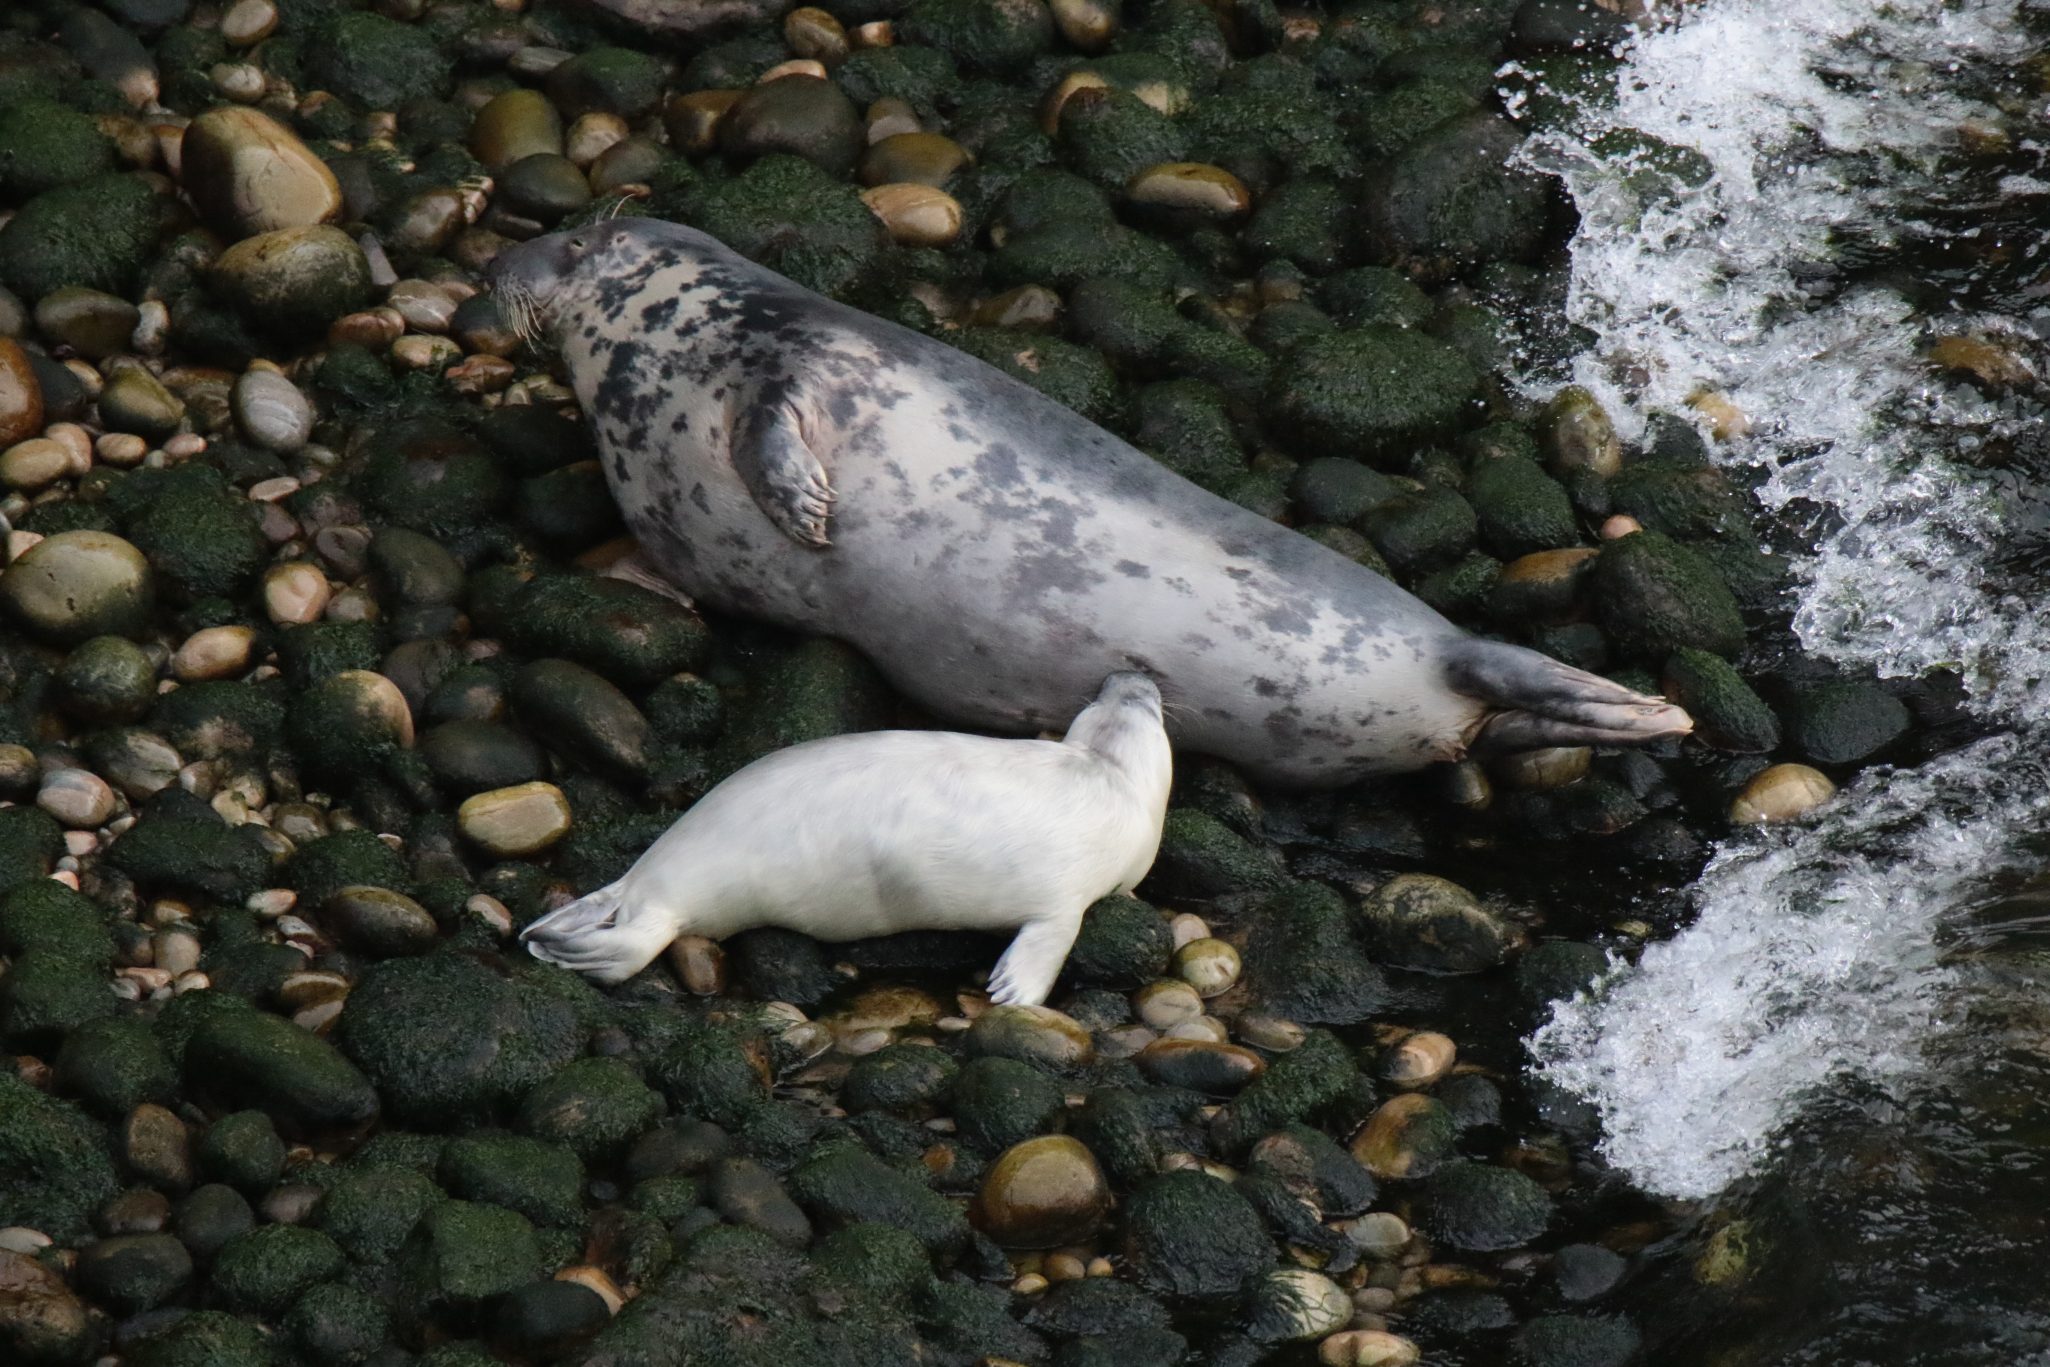 Seal and pup